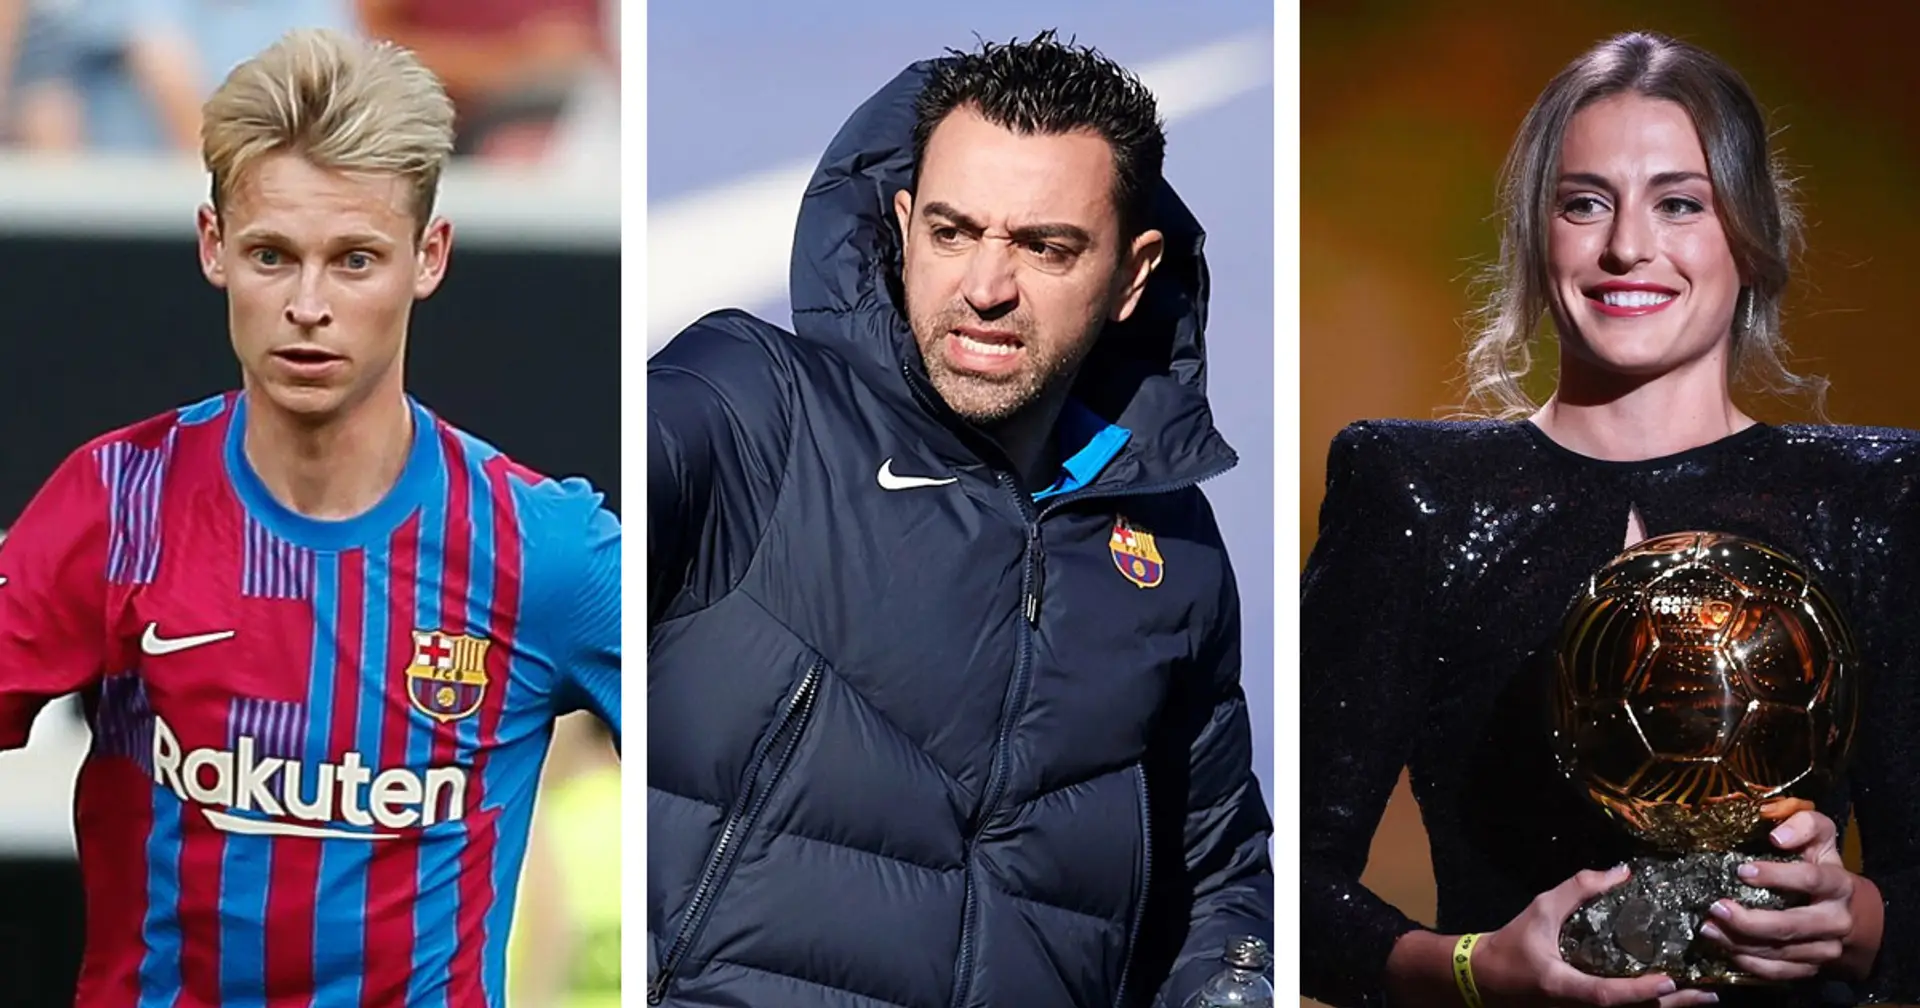 Xavi stopped Barca's pursuit of a physical midfielder and 3 more under-radar stories